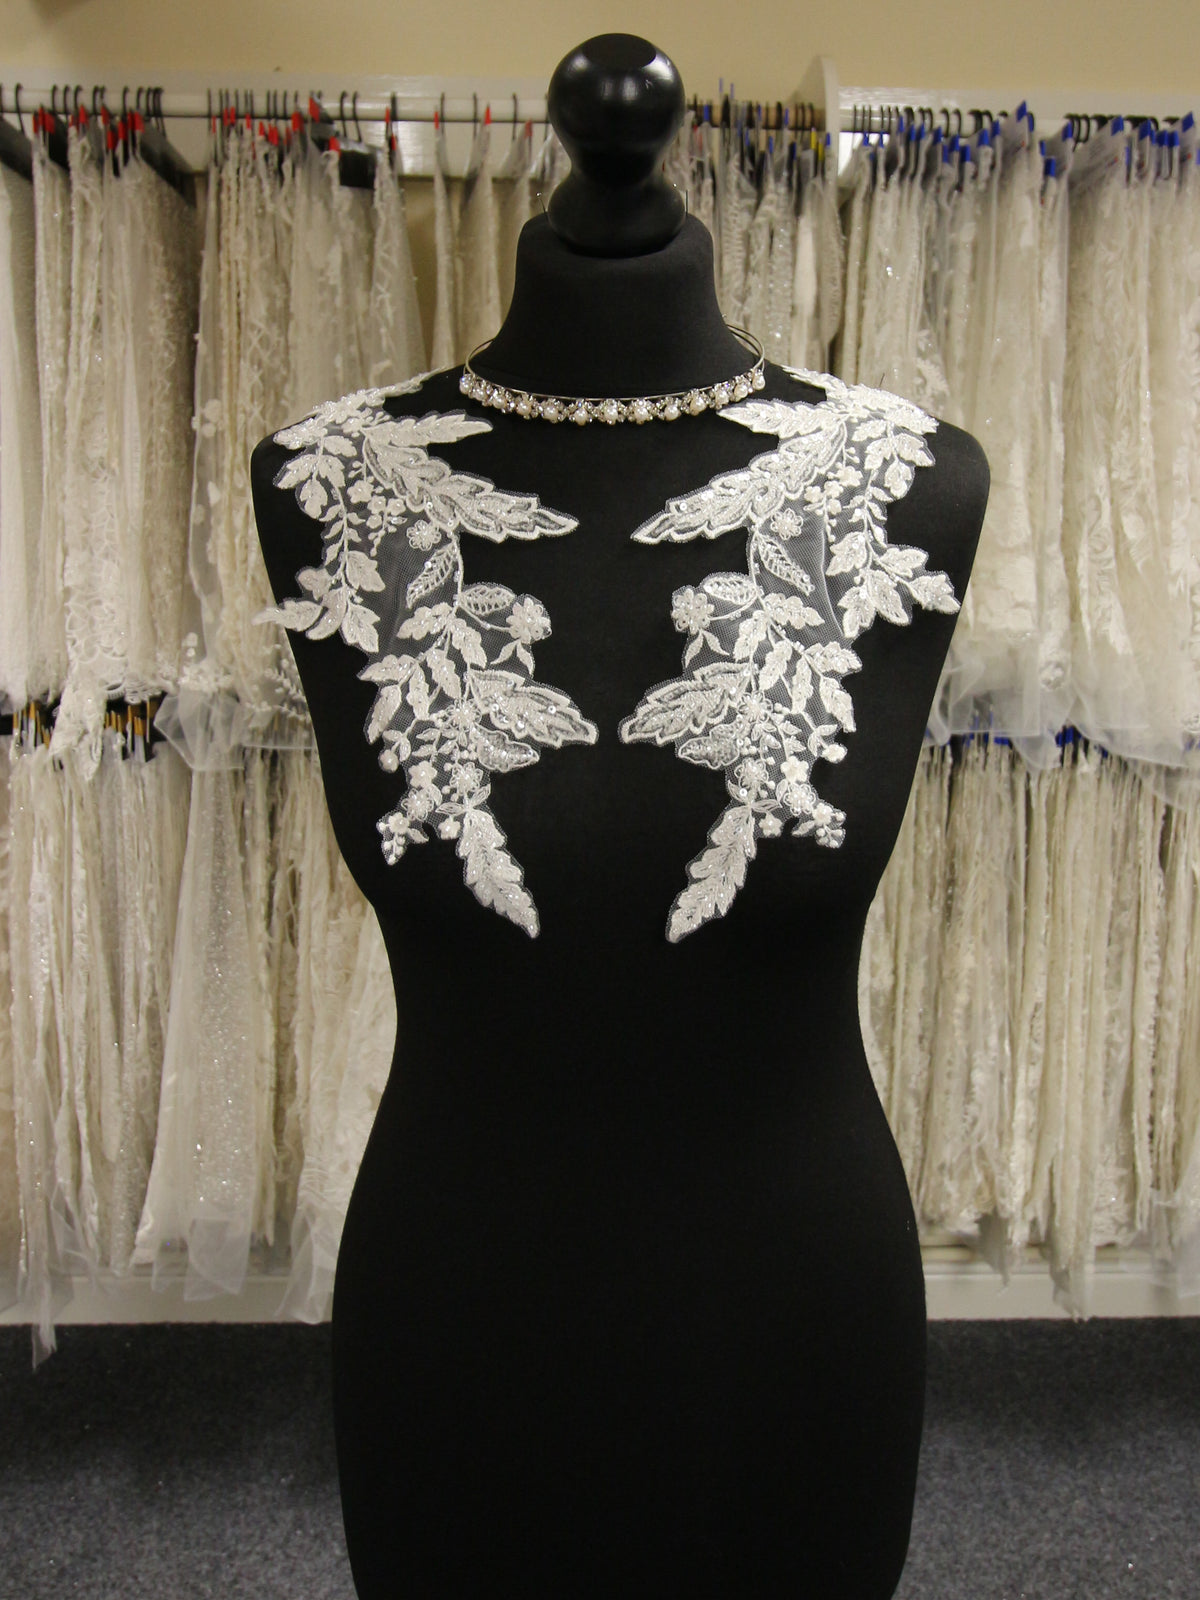 Ivory Beaded Lace Appliques - Bellflower